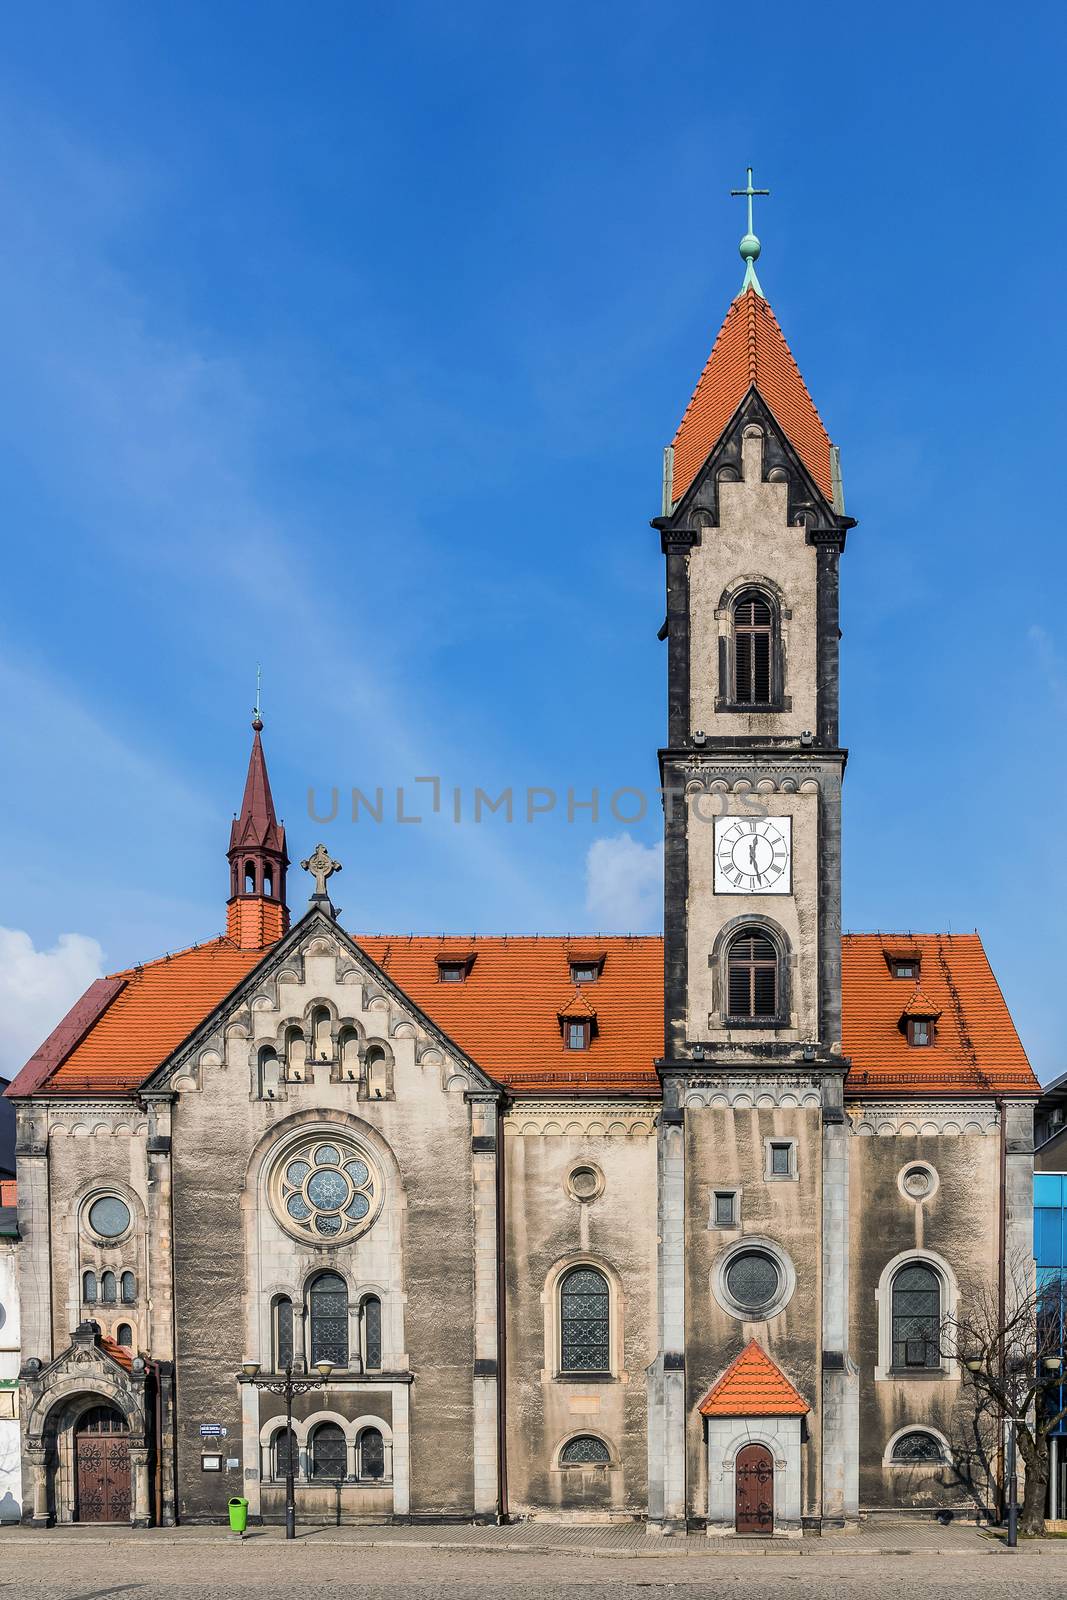 Lutheran Church of the Saviour in Tarnowskie Gory, Silesia region, Poland. Designed by Christoph Worbs, built in 1790, later in 1900 rebuilt in neo-Romanesque style by the architect Adolf Seiffhart.